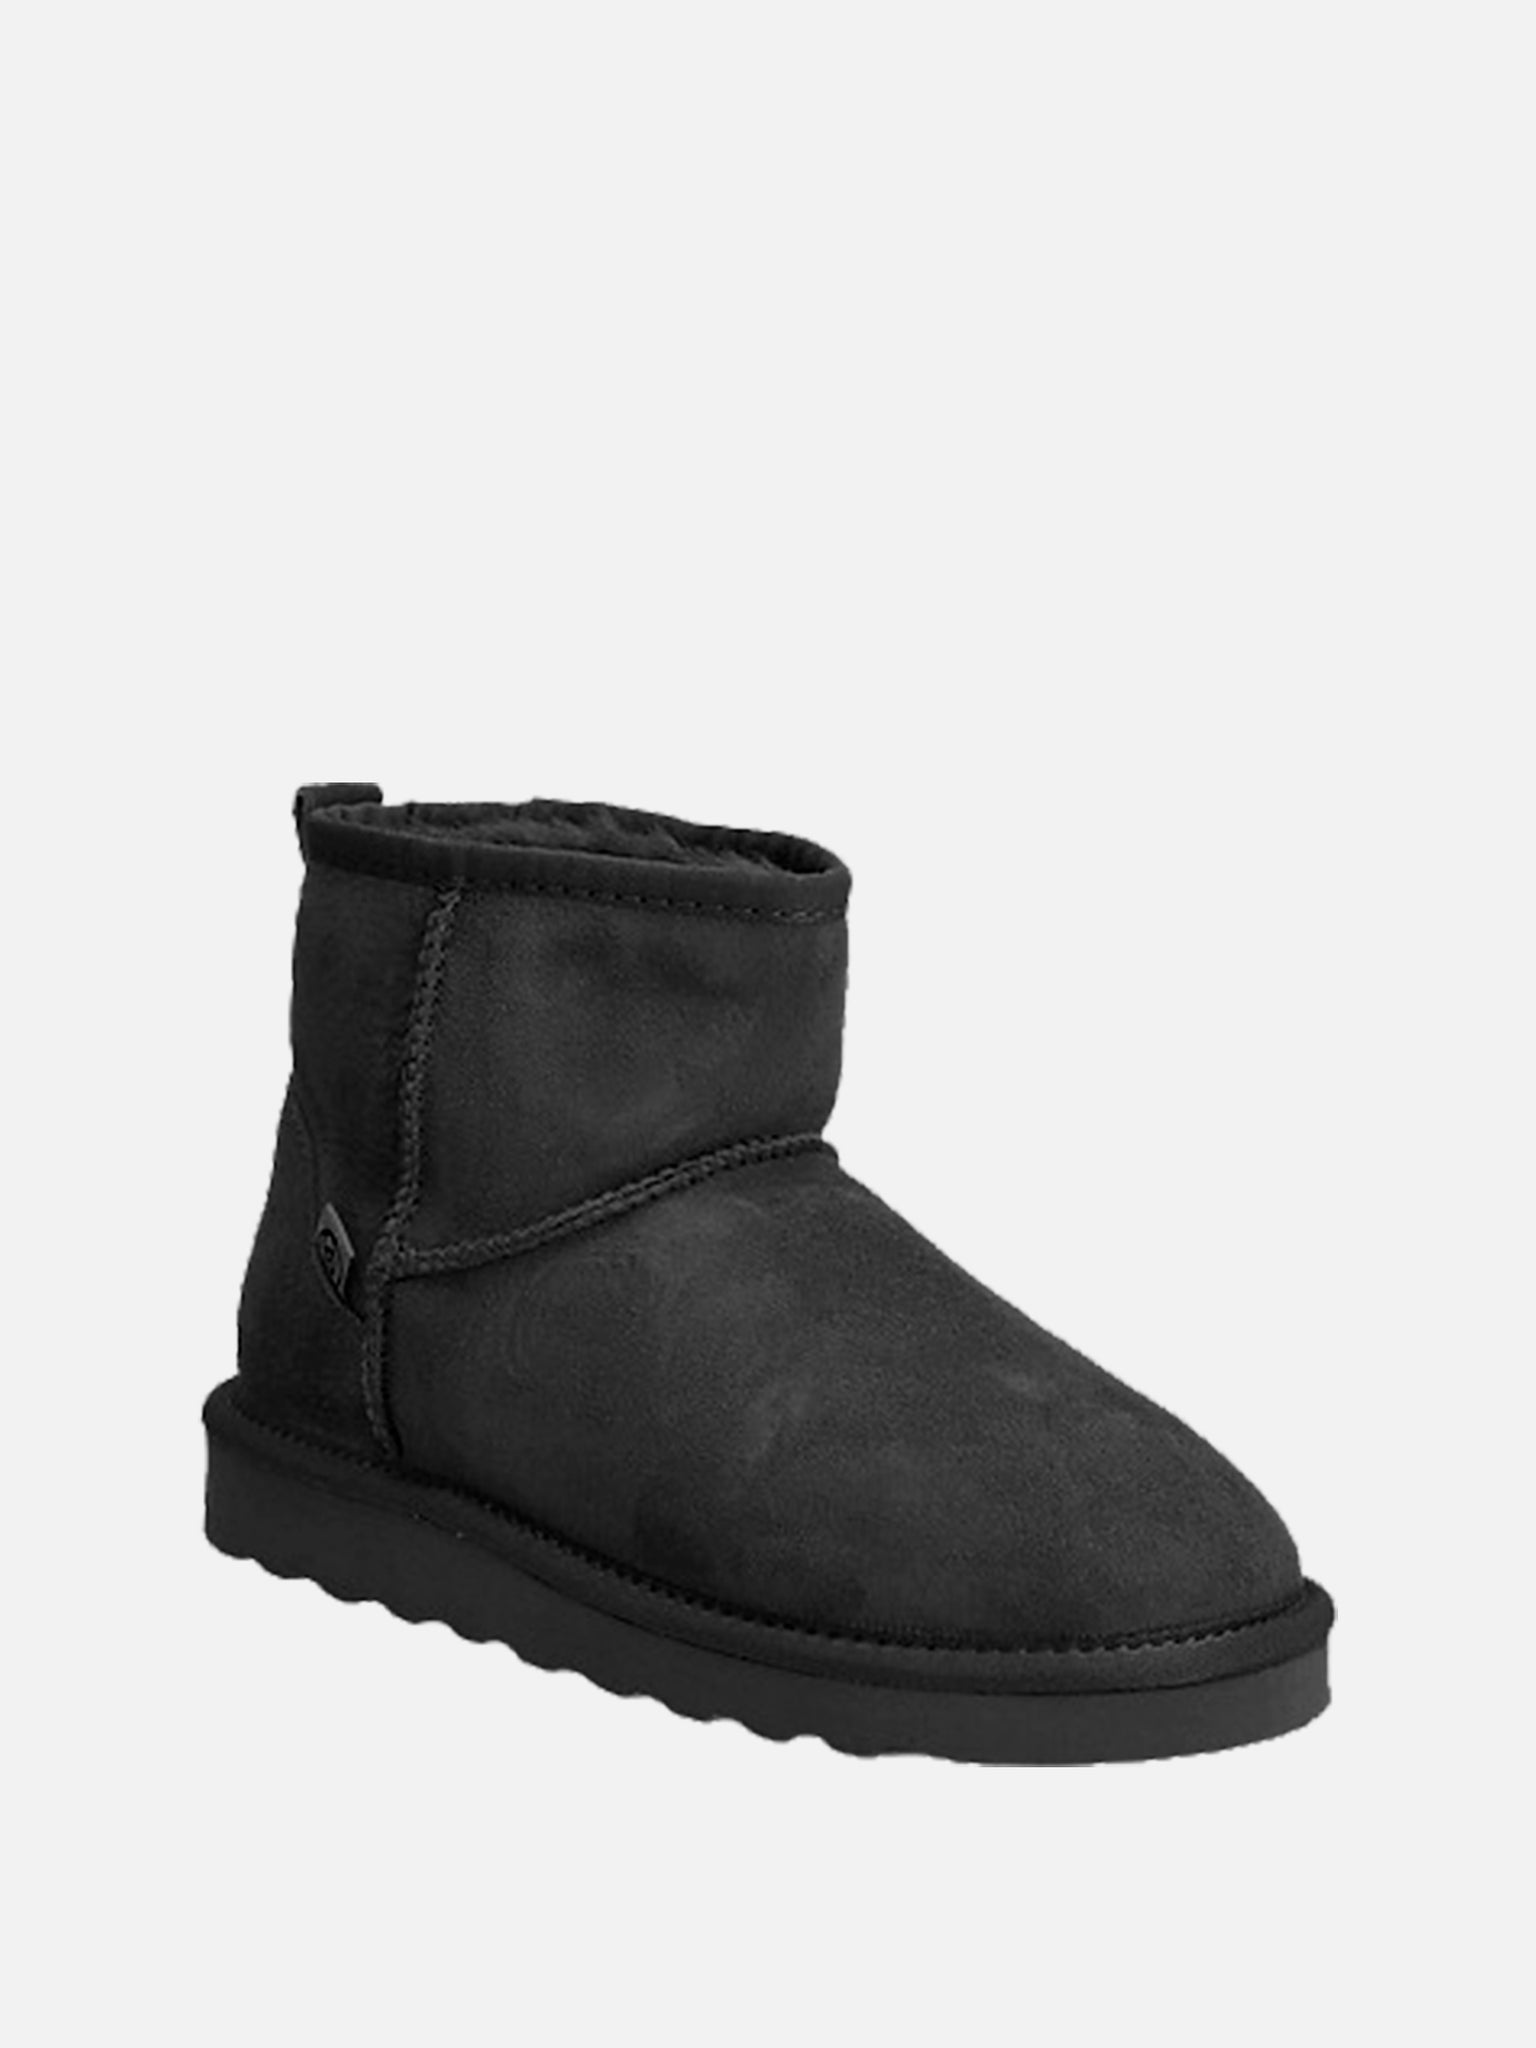 Shearling boots